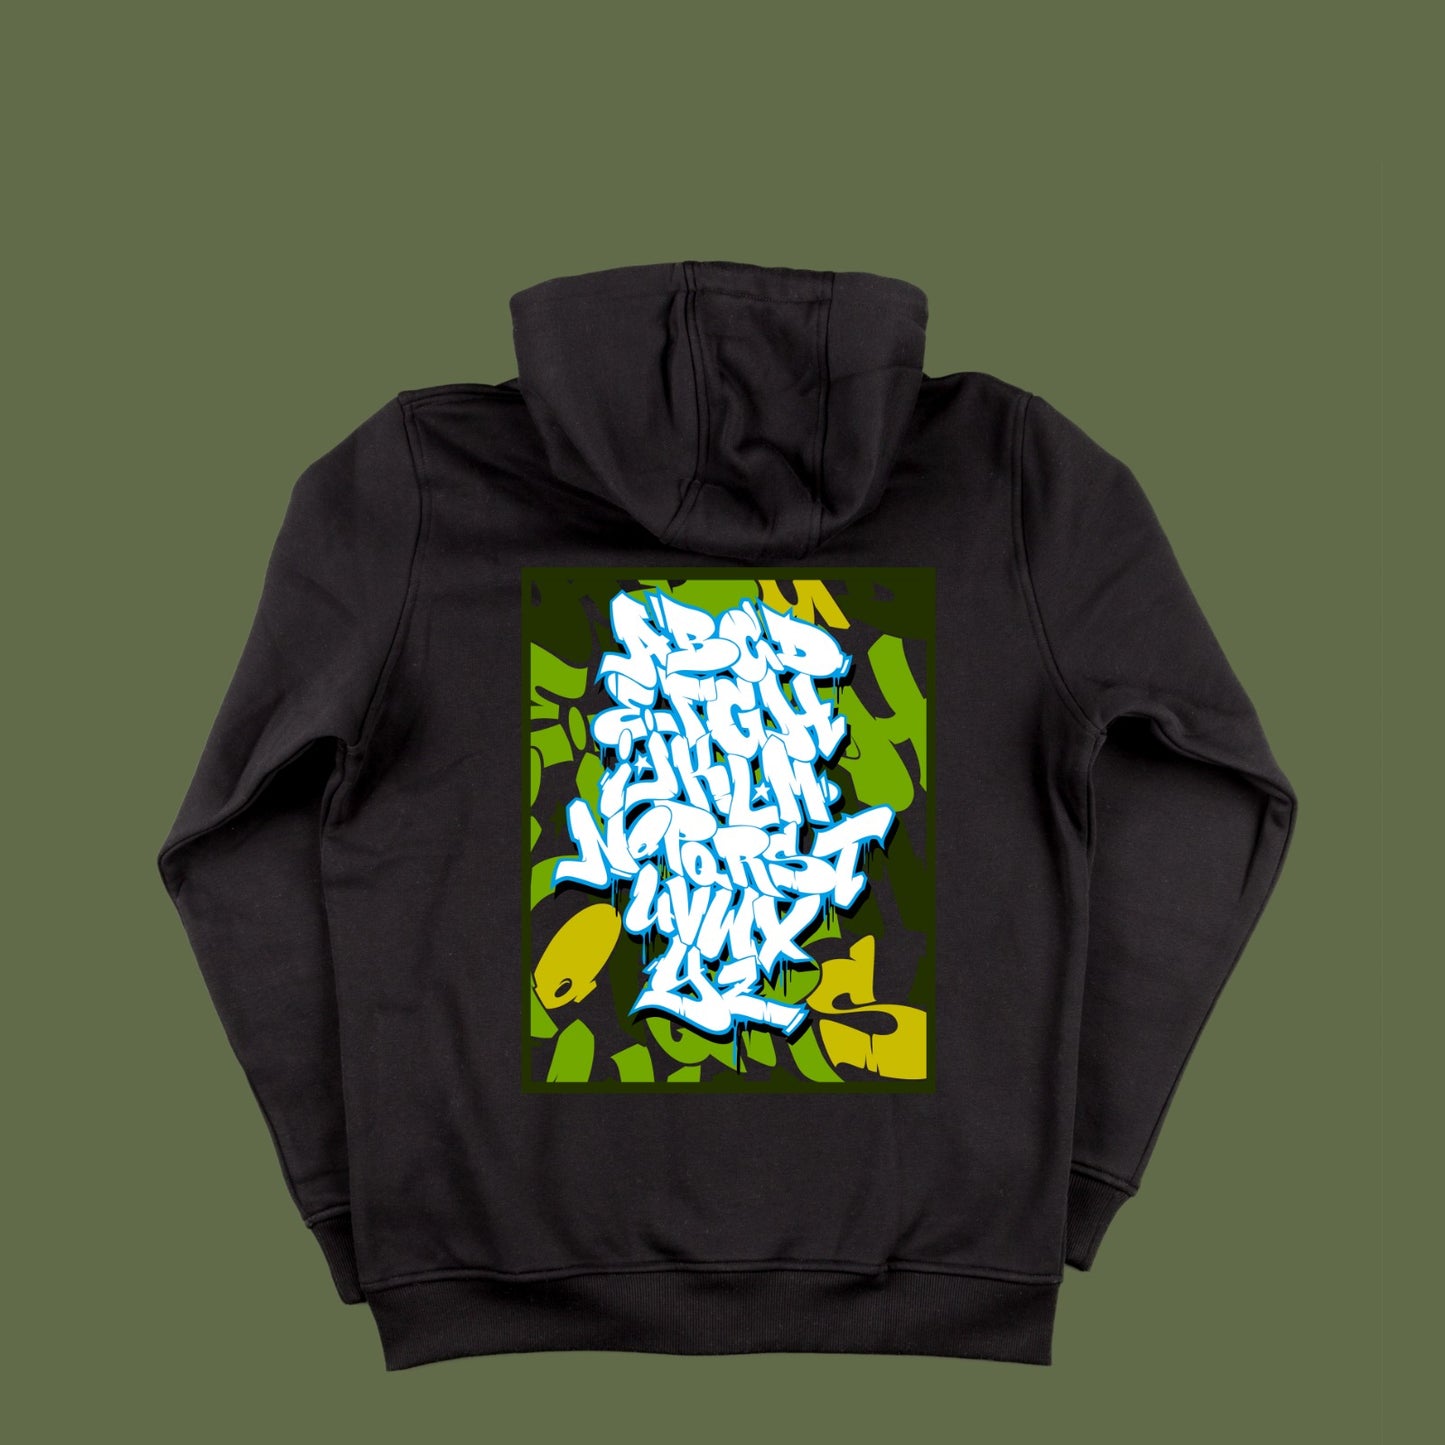 COLORED "ABC" Hoodie by ATOM